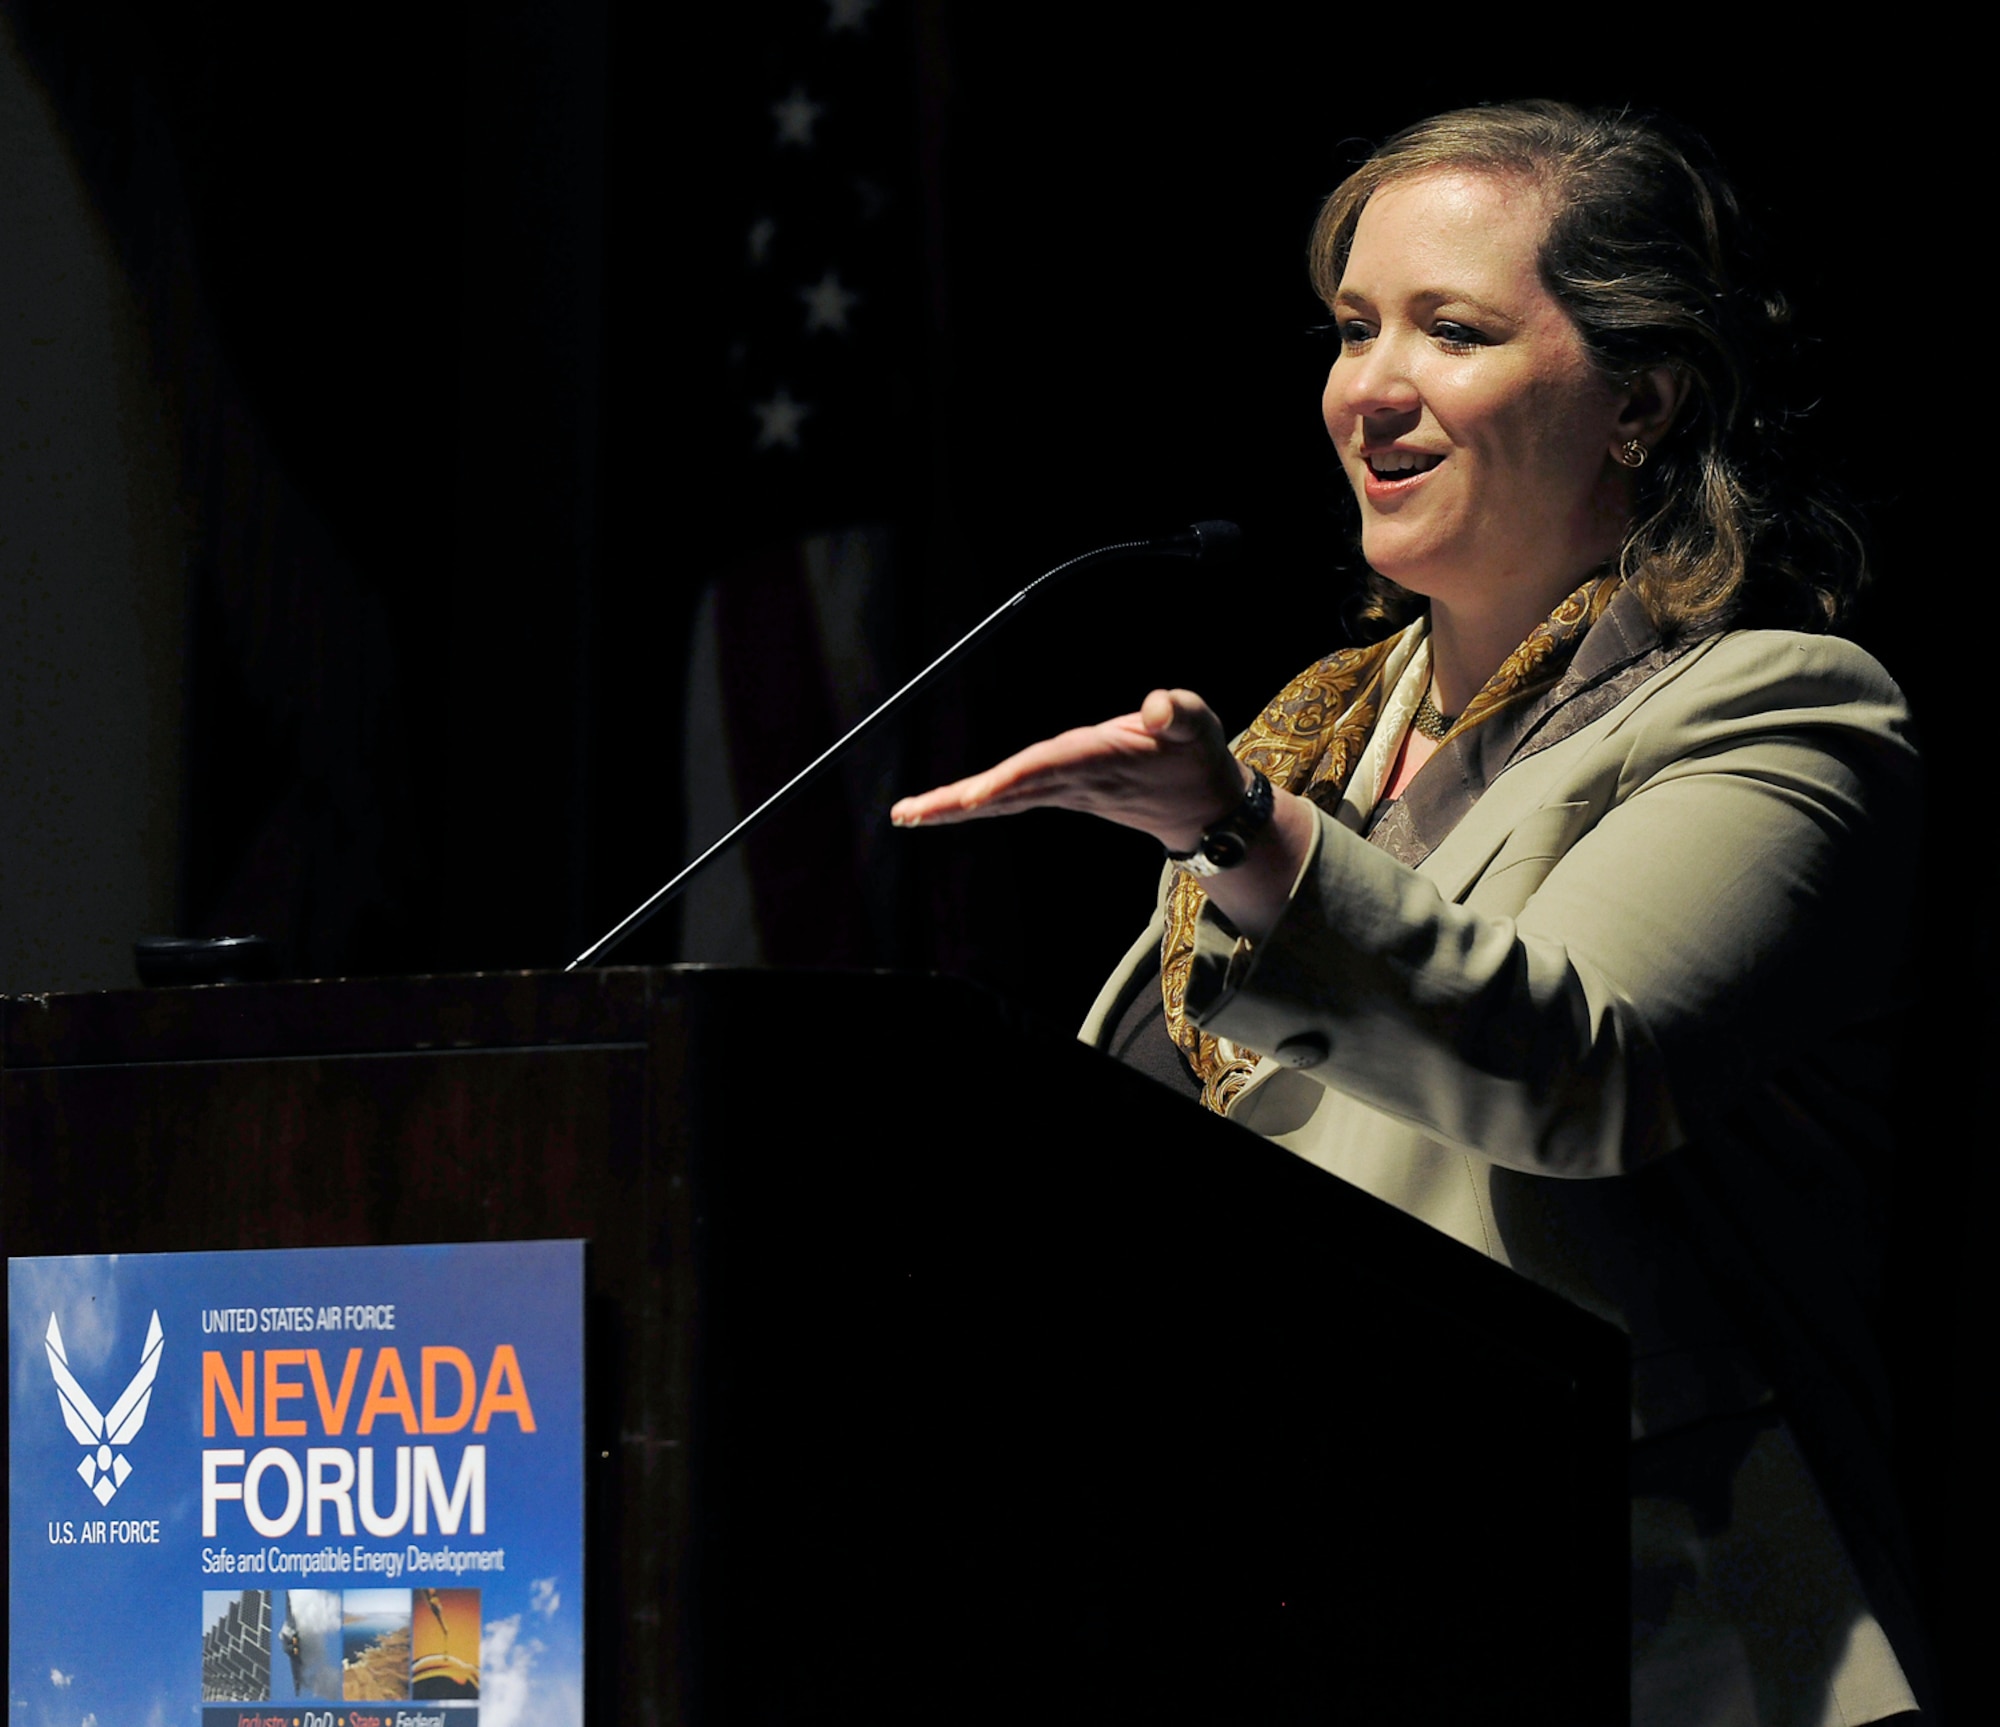 Undersecretary of the Air Force Erin C. Conaton delivers opening remarks at the Nevada Energy Forum, an Air Force-hosted three-day brainstorming to find ways for the service to reduce fossil fuels usage Aug. 24, 2010, in Las Vegas. Ms. Conaton opened the discussion with Terry Yonkers, the assistant secretary of the Air Force for installations, environment and logistics, and Nevada's Lieutenant Governor, Brian Krolicki. (U.S. Air Force photo/Scott M. Ash)